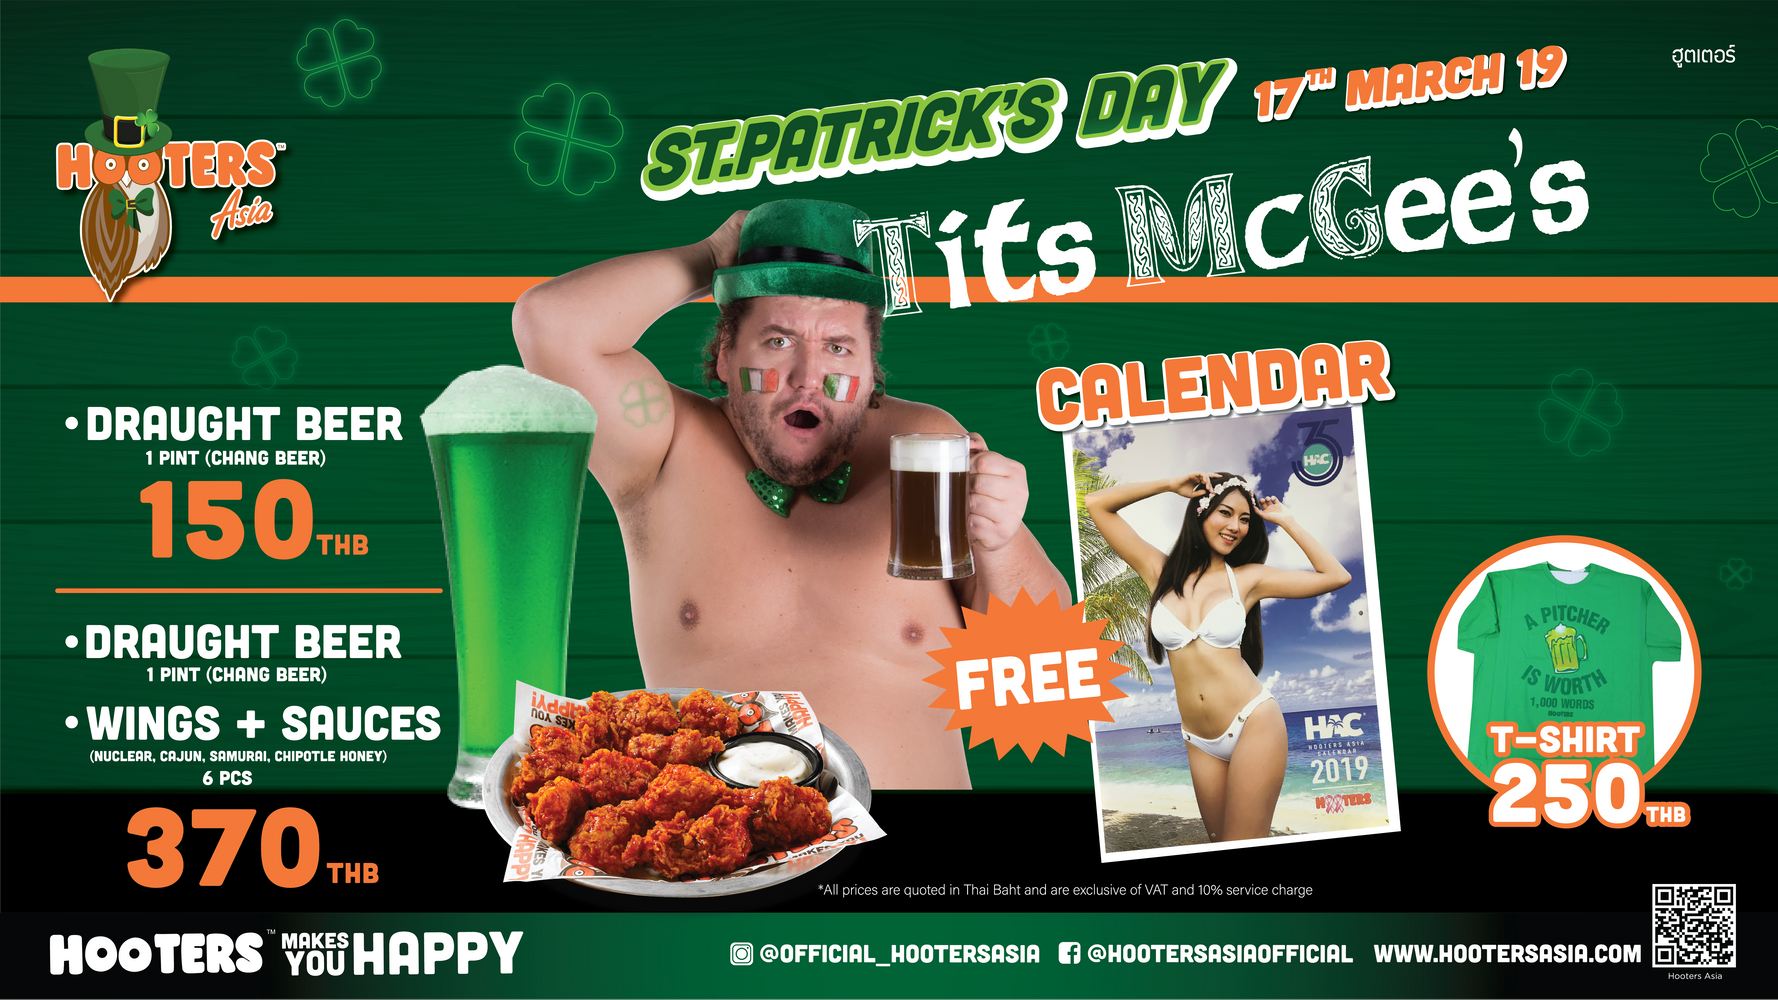 Hooters will be Back, Get Lucky at Tits McGhees on 17 March